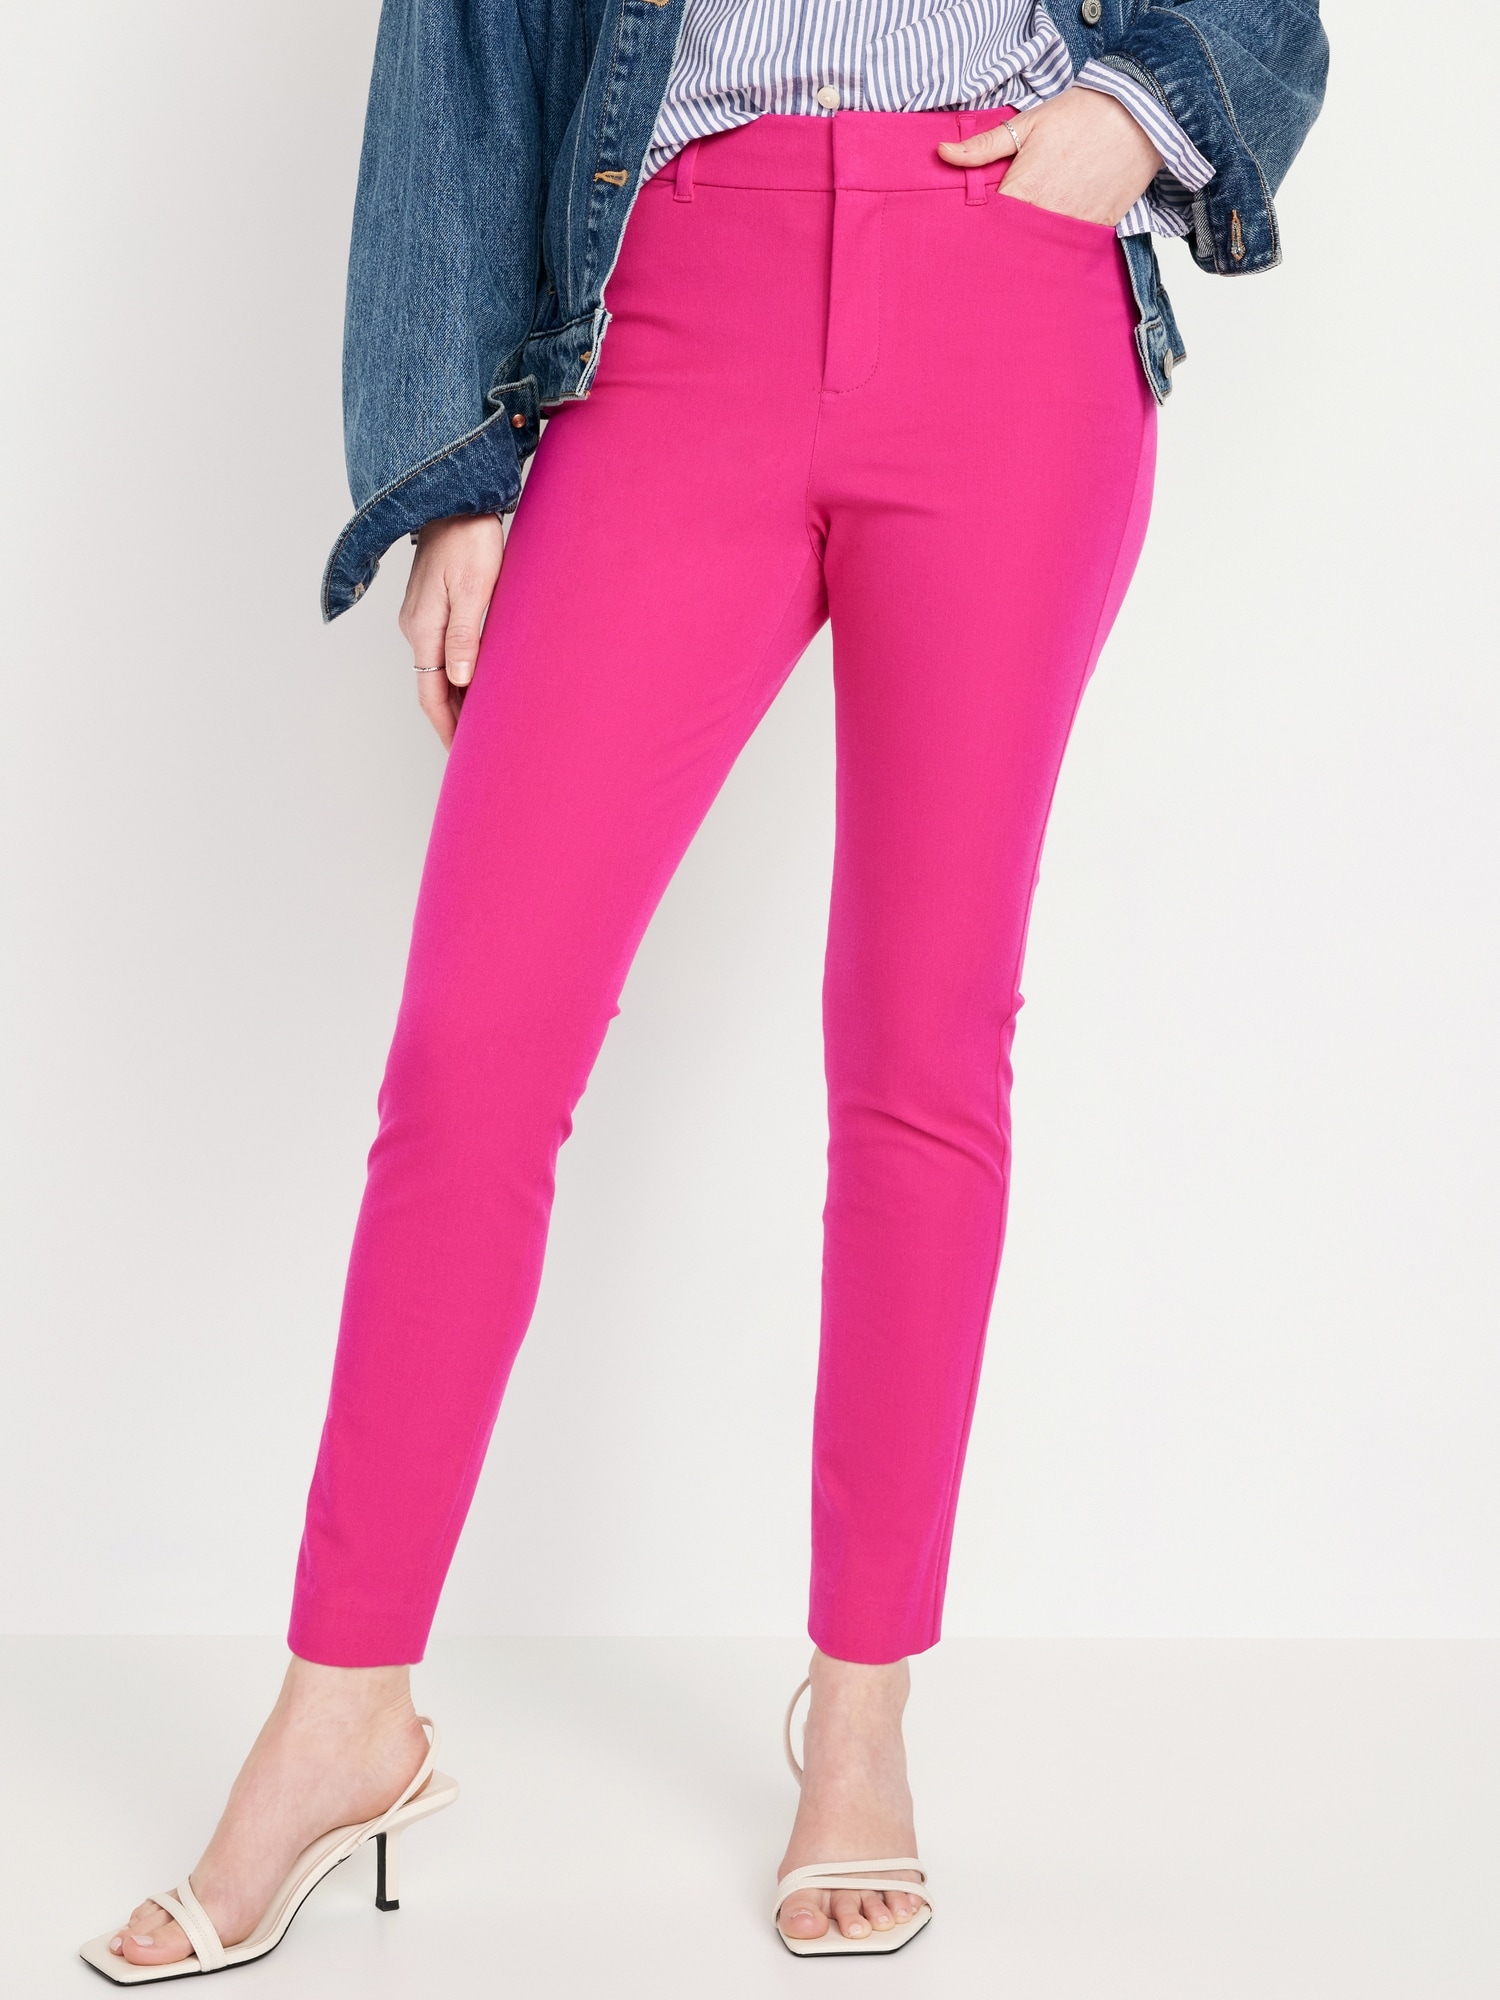 Old Navy High Rise Pixie Ankle Pants, Pants